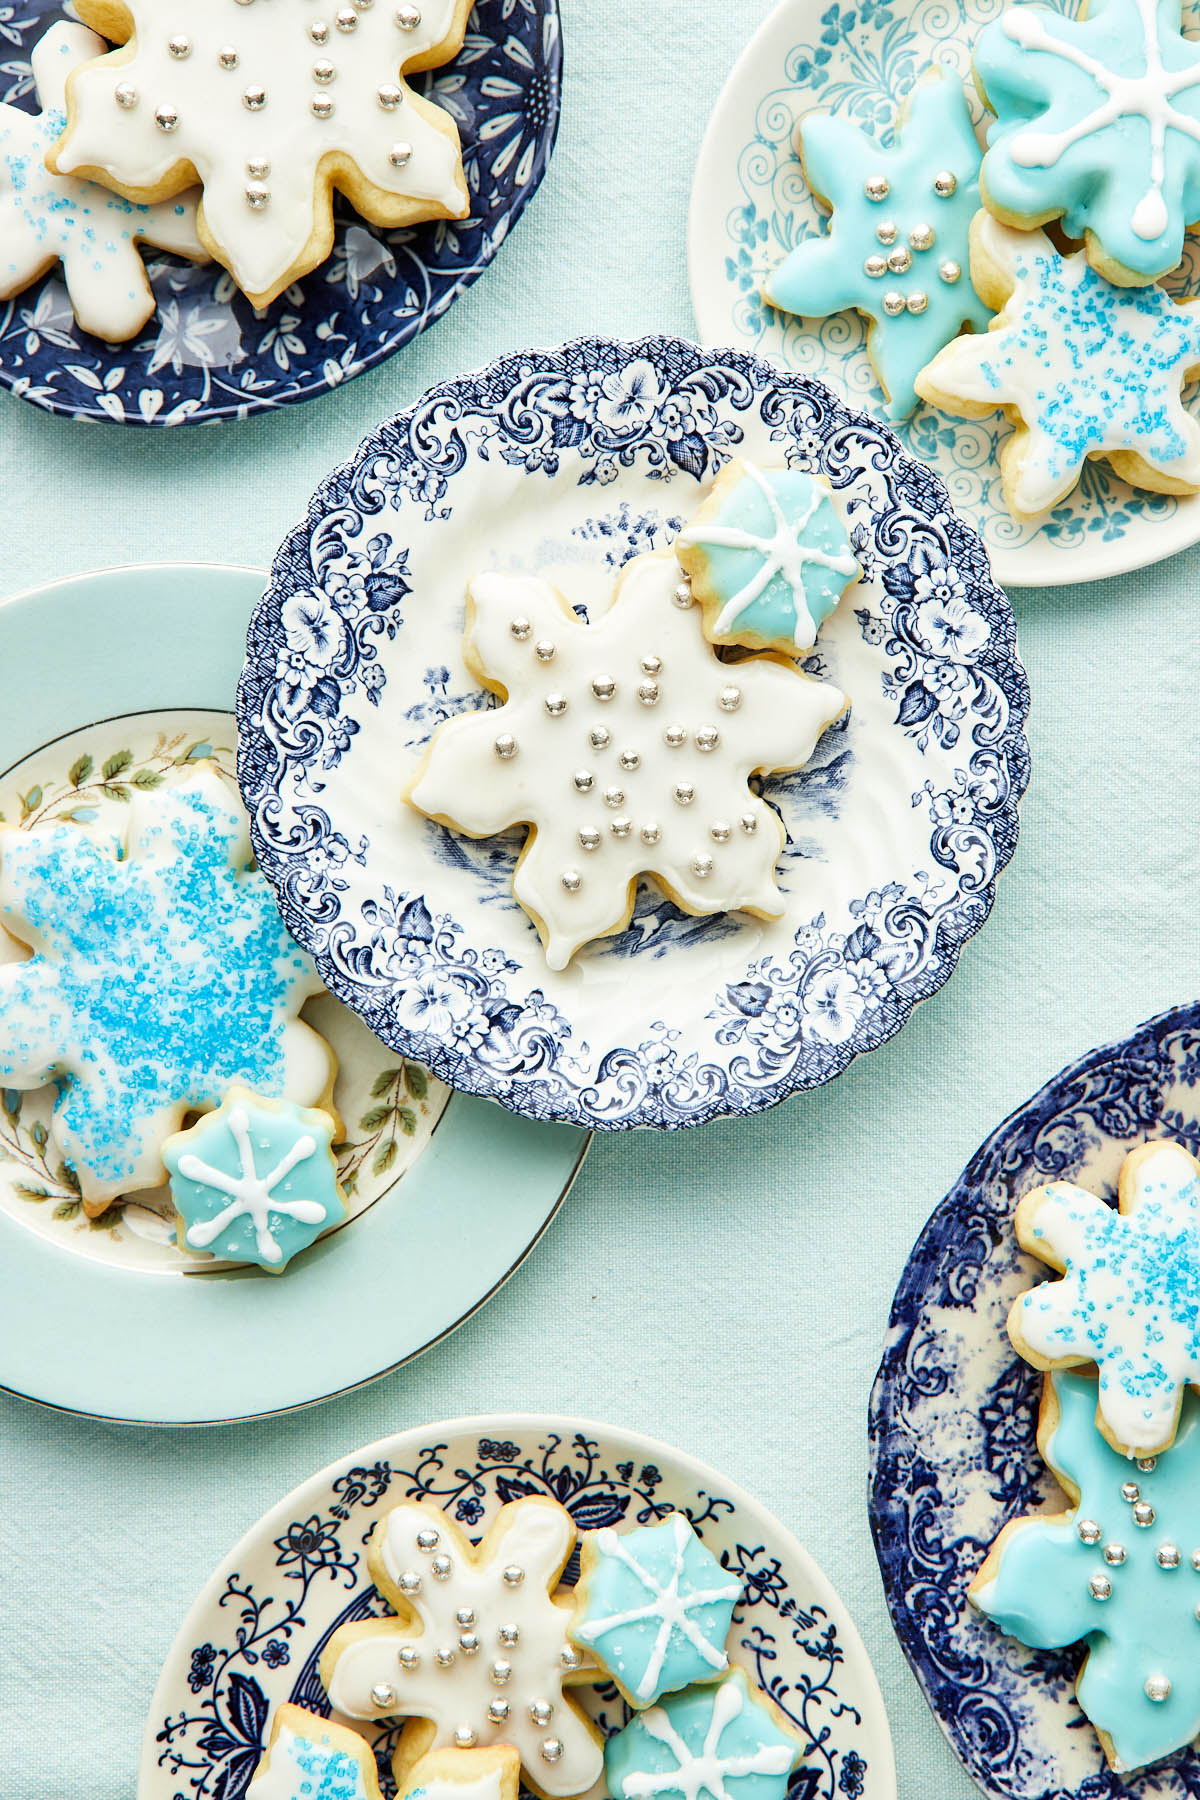 A variety of blue and white plates topped with different-sized snowflake sugar cookies.